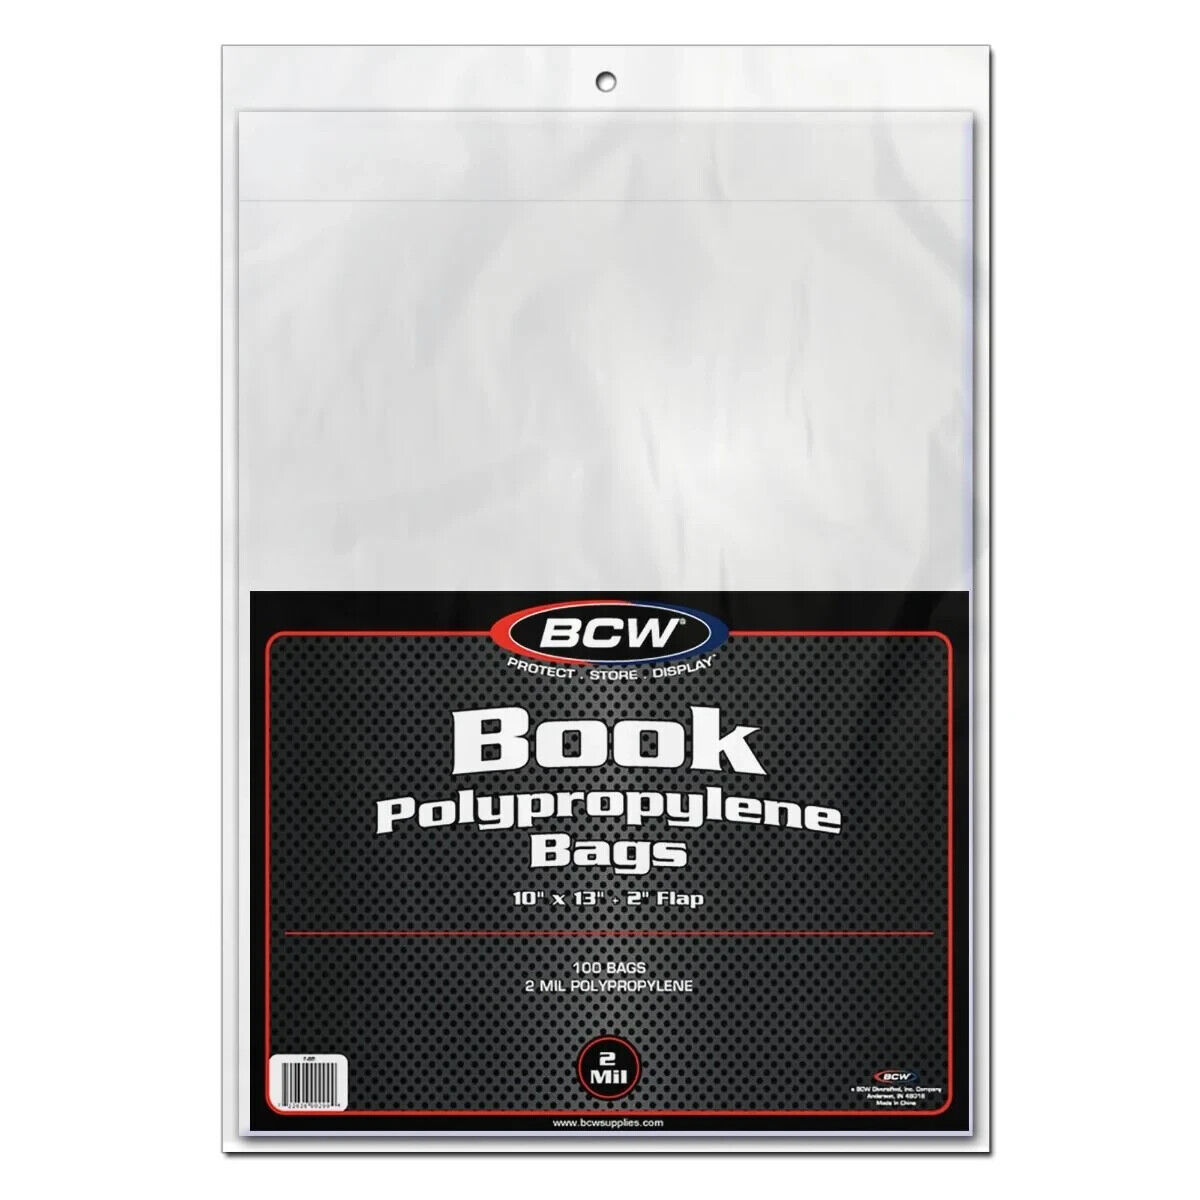 BCW Book Storage Bags 10x13 2 Mil Poly Sleeves (100) Acid Free Archival Quality